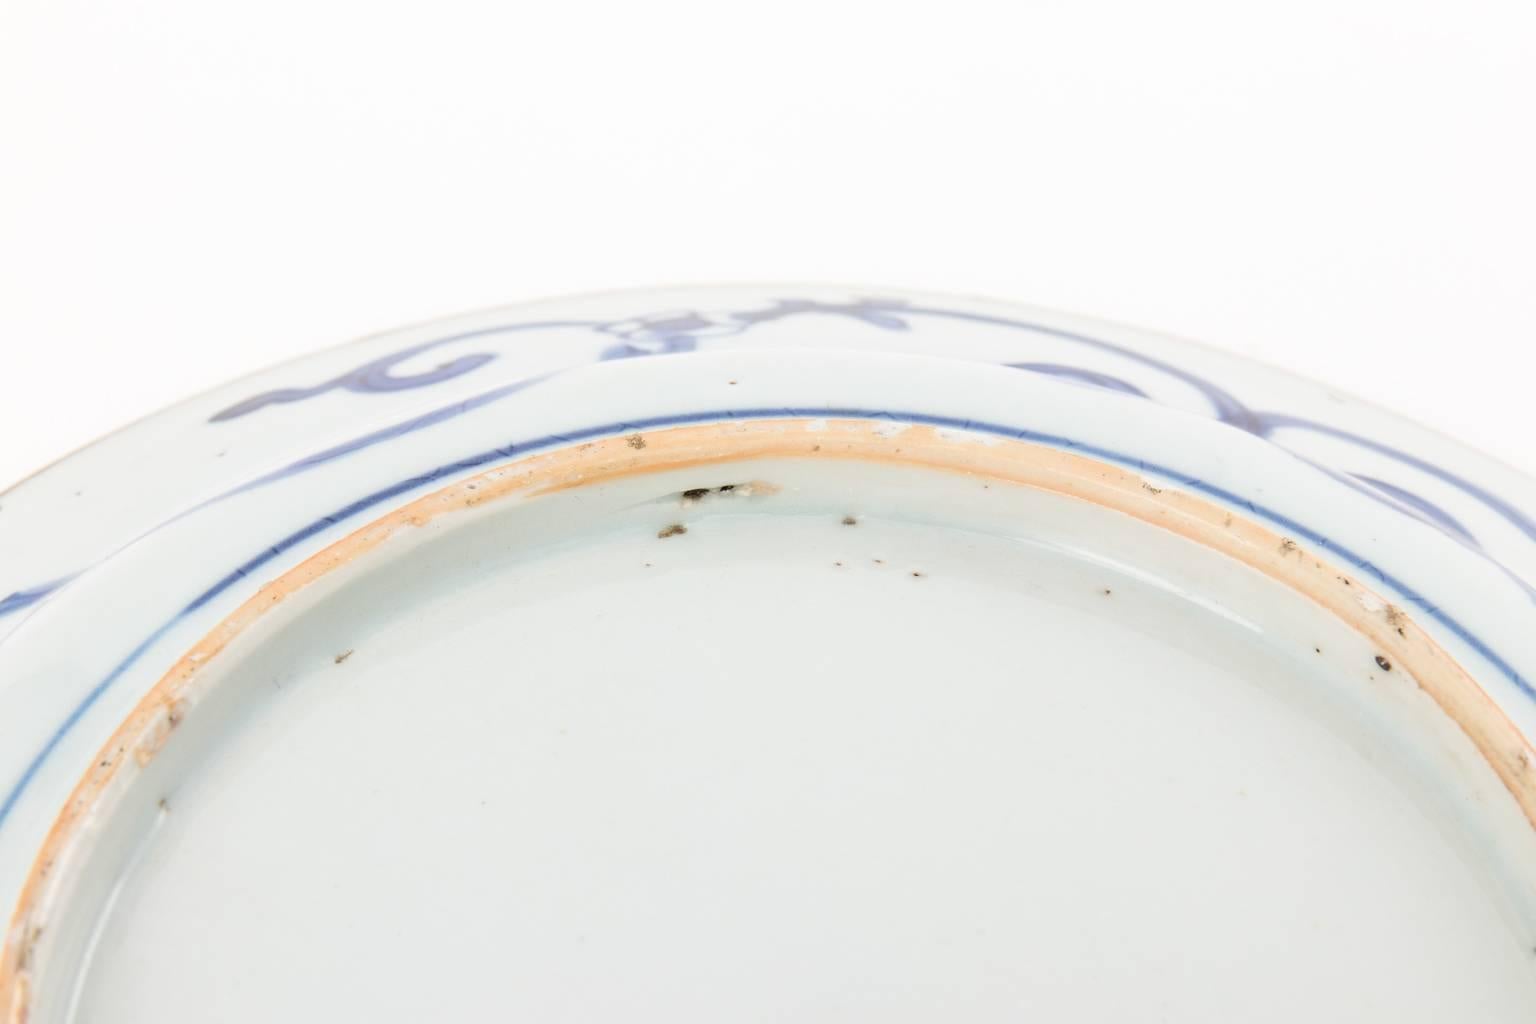 Early 20th century Qing dynasty porcelain painted blue and white.
 